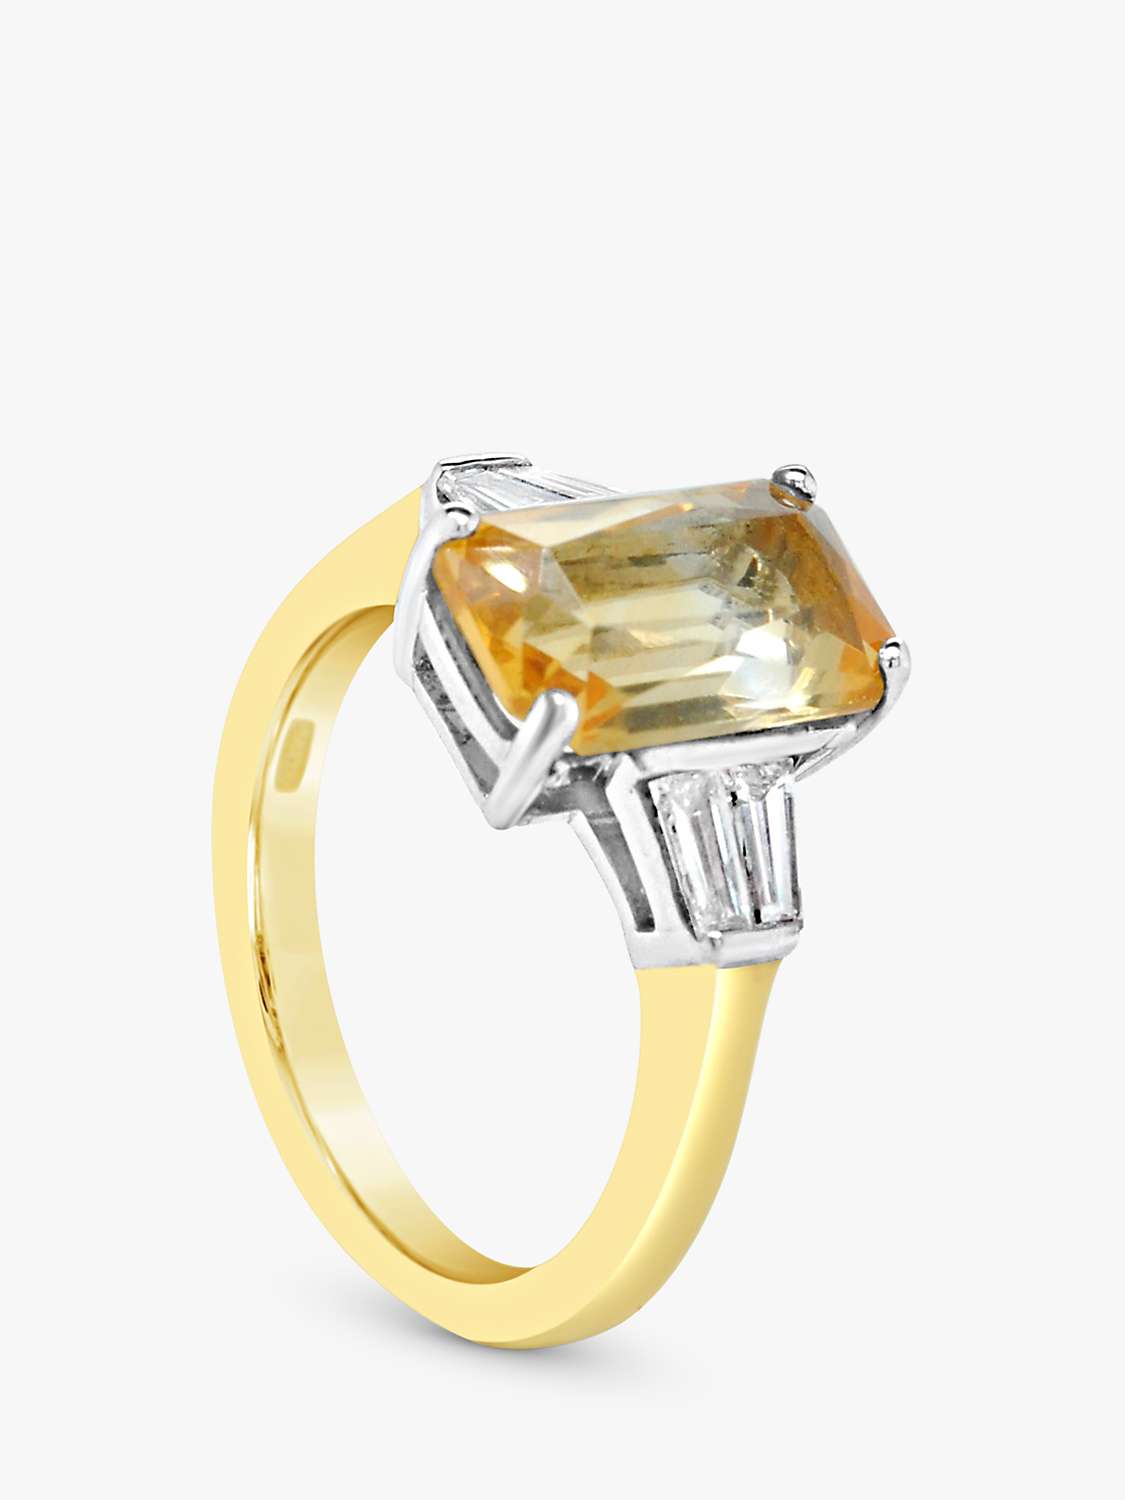 Buy Milton & Humble Jewellery Second Hand 18ct Gold Citrine & Diamond Cocktail Ring, Gold/Silver Online at johnlewis.com